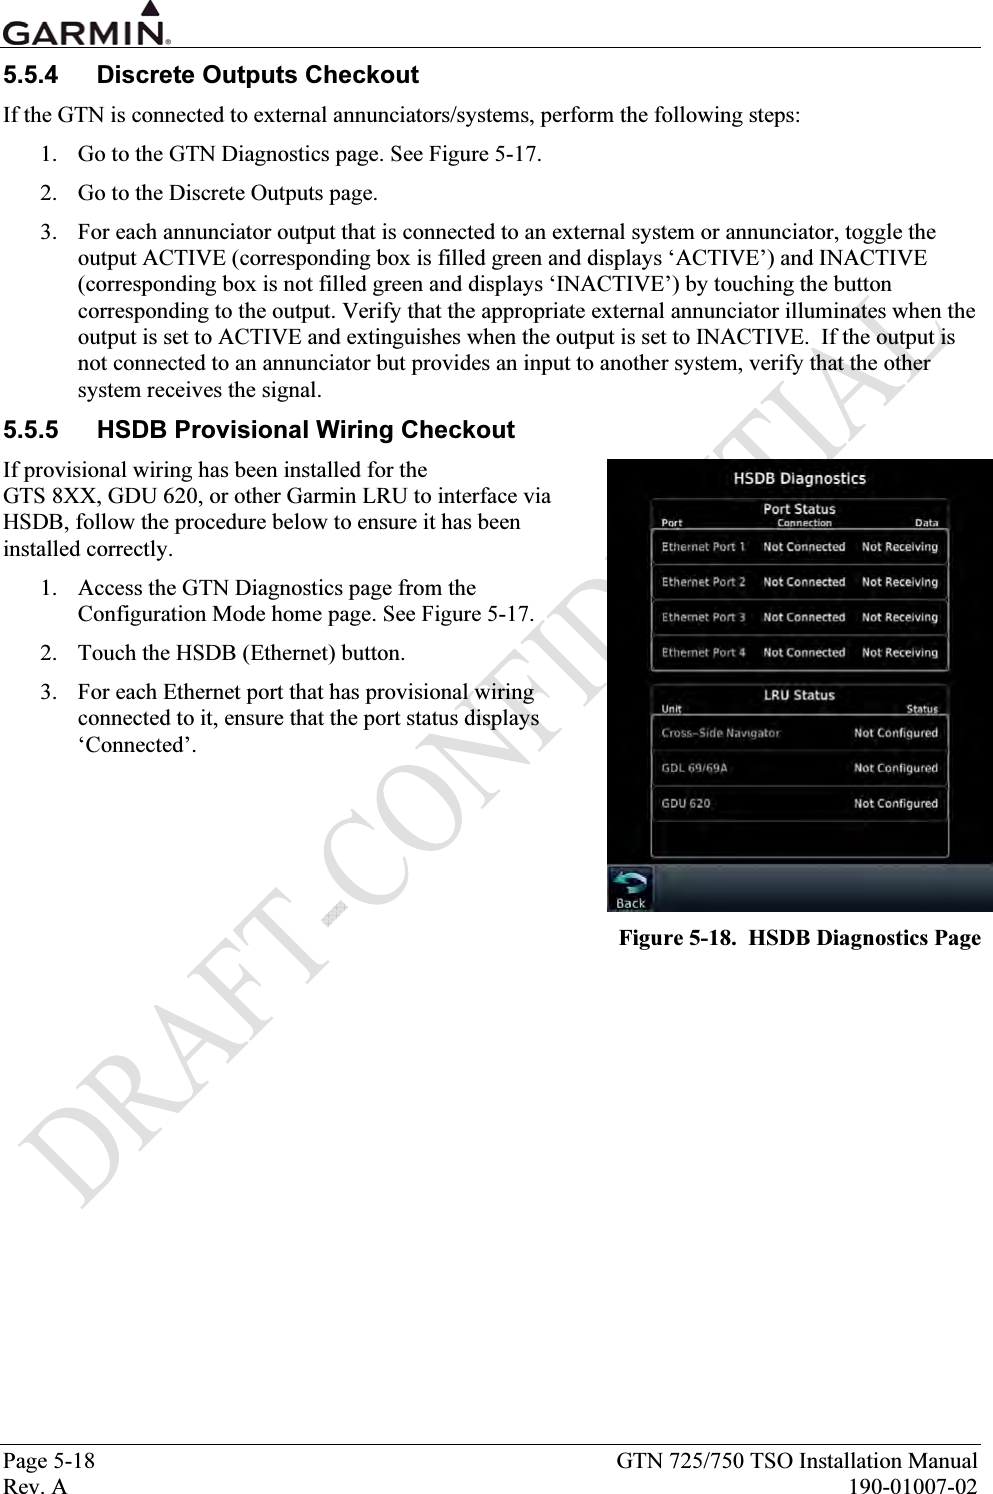  Page 5-18  GTN 725/750 TSO Installation Manual Rev. A  190-01007-02 5.5.4  Discrete Outputs Checkout If the GTN is connected to external annunciators/systems, perform the following steps: 1. Go to the GTN Diagnostics page. See Figure 5-17. 2. Go to the Discrete Outputs page. 3. For each annunciator output that is connected to an external system or annunciator, toggle the output ACTIVE (corresponding box is filled green and displays ‘ACTIVE’) and INACTIVE (corresponding box is not filled green and displays ‘INACTIVE’) by touching the button corresponding to the output. Verify that the appropriate external annunciator illuminates when the output is set to ACTIVE and extinguishes when the output is set to INACTIVE.  If the output is not connected to an annunciator but provides an input to another system, verify that the other system receives the signal. 5.5.5  HSDB Provisional Wiring Checkout If provisional wiring has been installed for the  GTS 8XX, GDU 620, or other Garmin LRU to interface via HSDB, follow the procedure below to ensure it has been installed correctly. 1. Access the GTN Diagnostics page from the Configuration Mode home page. See Figure 5-17. 2. Touch the HSDB (Ethernet) button. 3. For each Ethernet port that has provisional wiring connected to it, ensure that the port status displays ‘Connected’.  Figure 5-18.  HSDB Diagnostics Page  